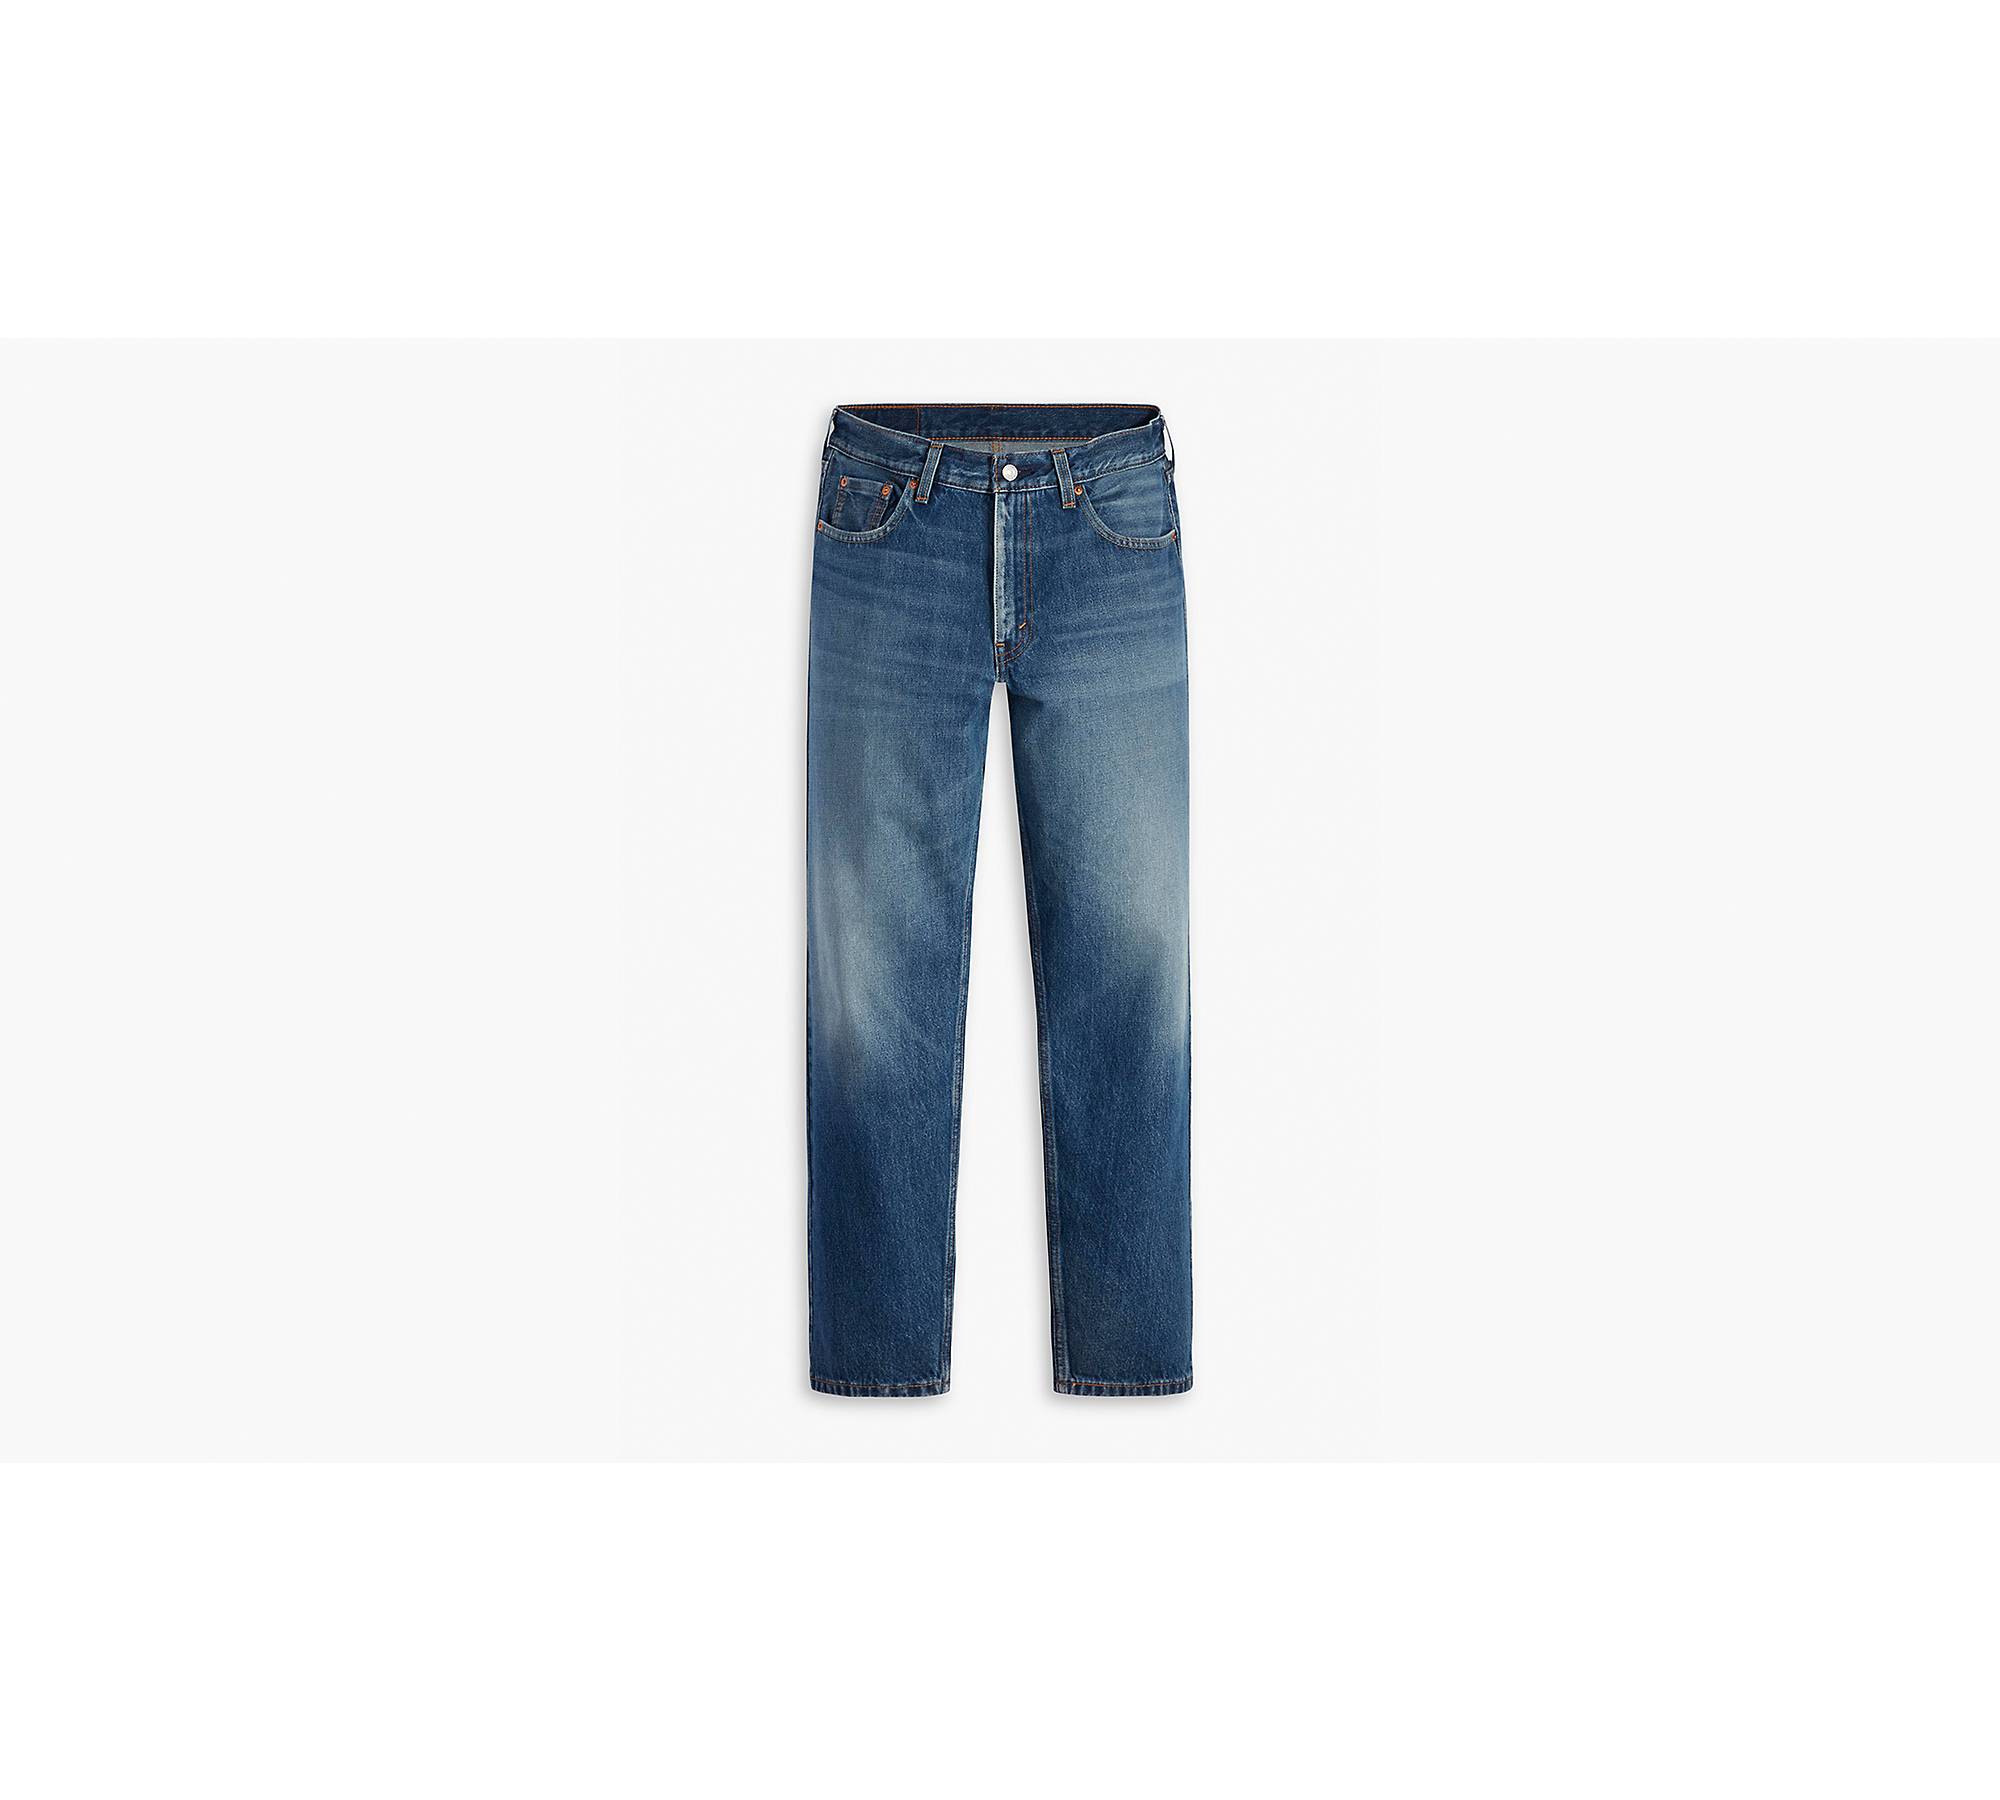 550™ '92 Relaxed Taper Fit Men's Jeans - Dark Wash | Levi's® CA